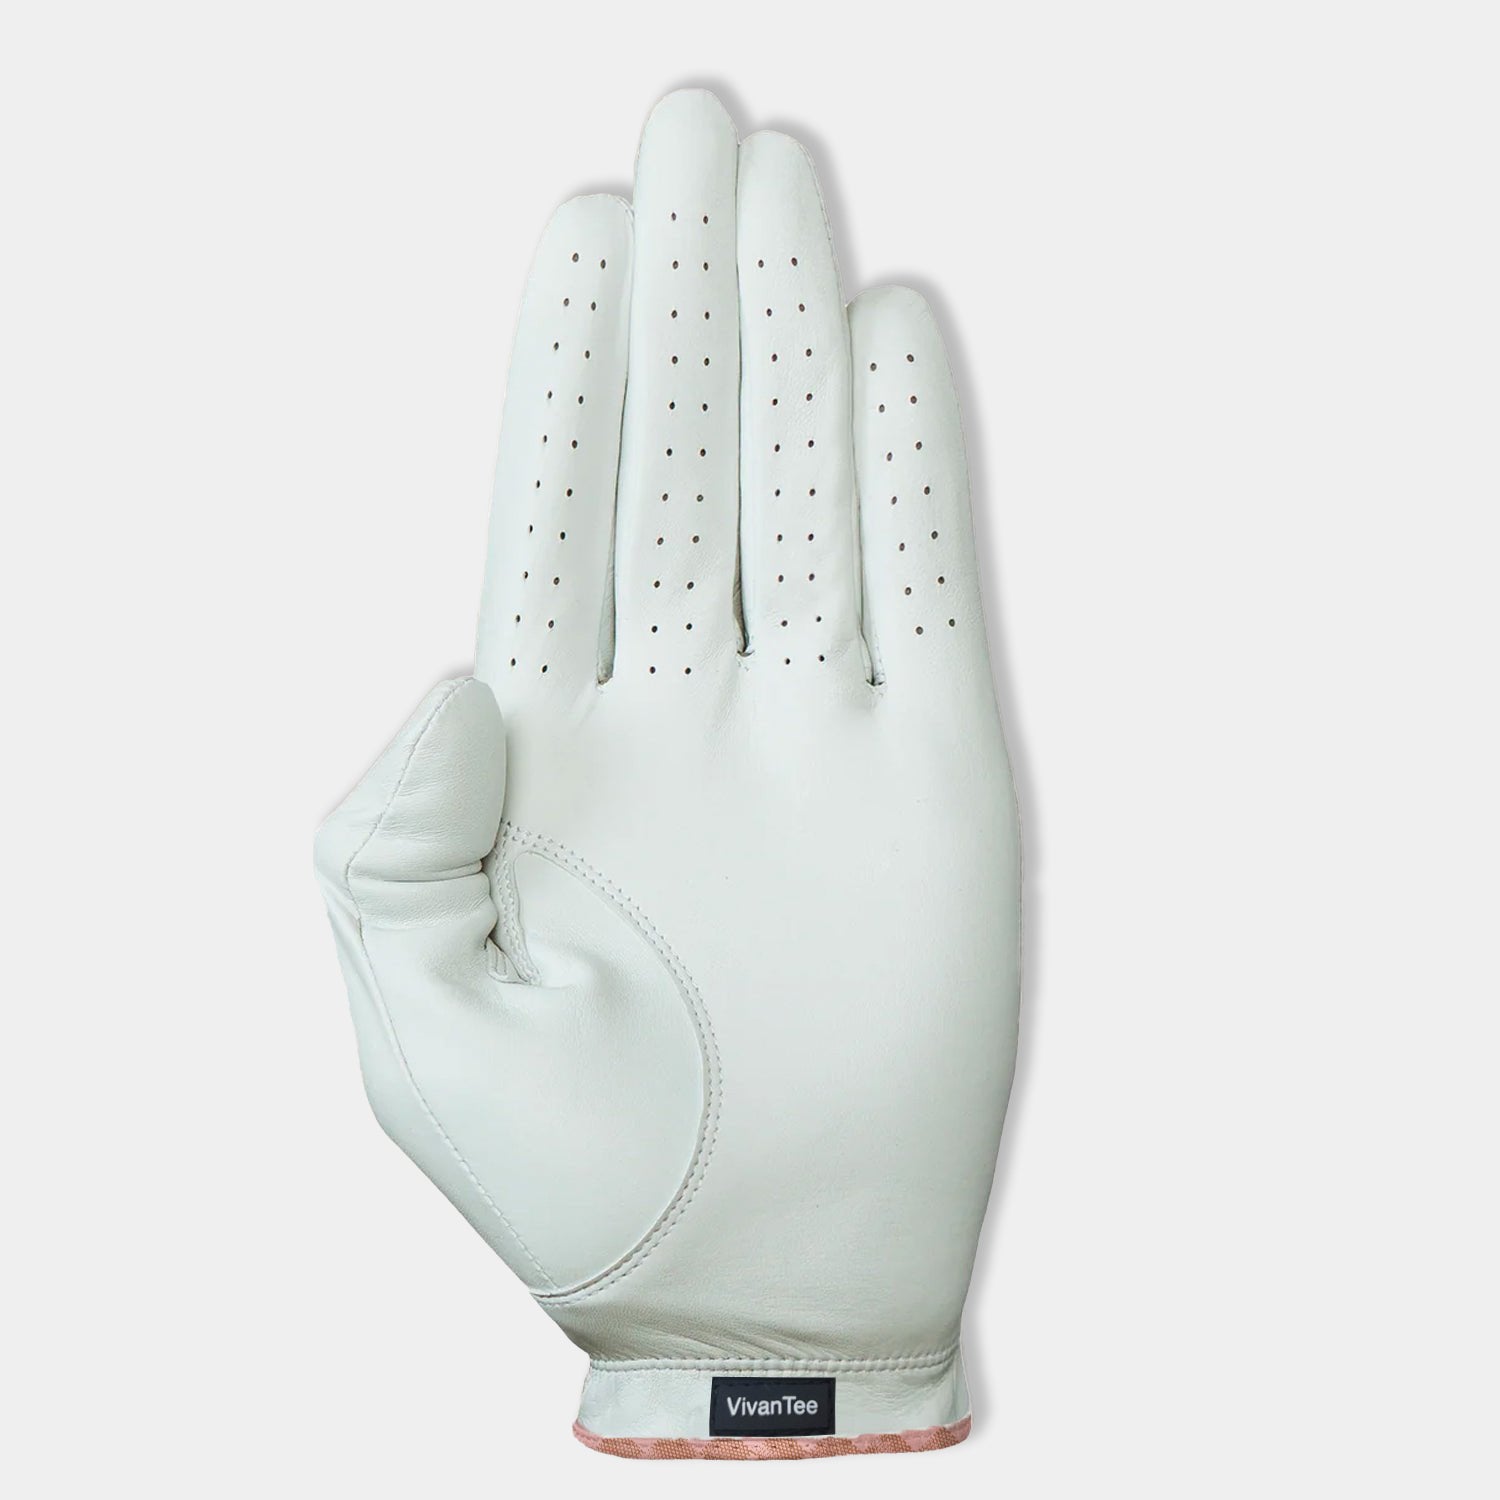 Men's pink golf glove bottom, showing bottom and palm with VivanTee logo.